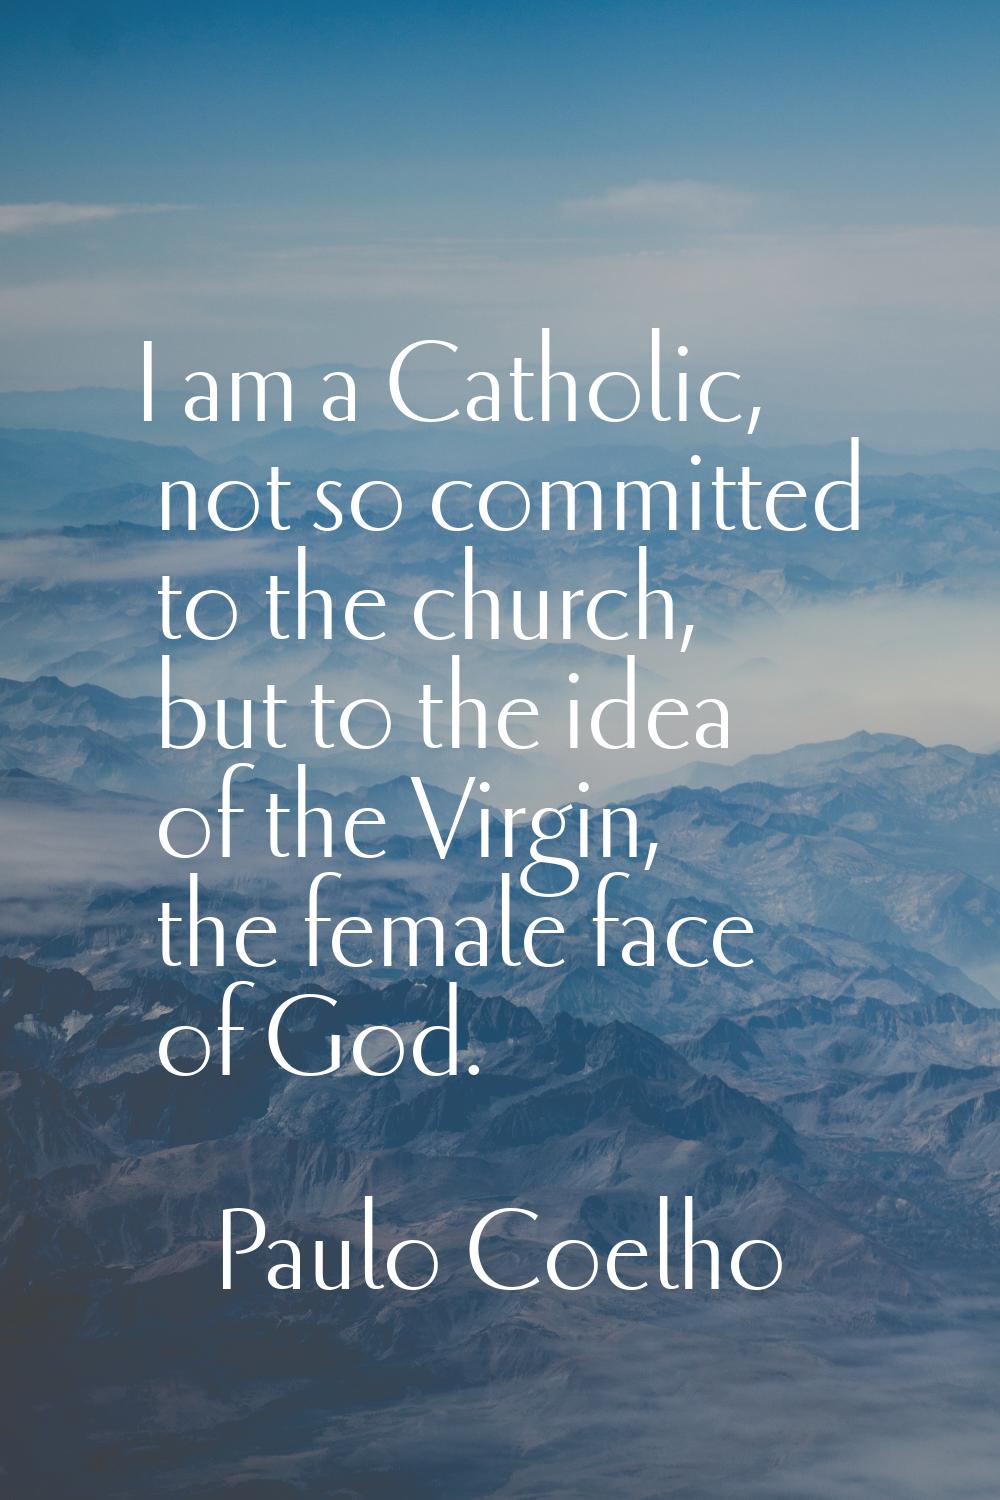 I am a Catholic, not so committed to the church, but to the idea of the Virgin, the female face of 